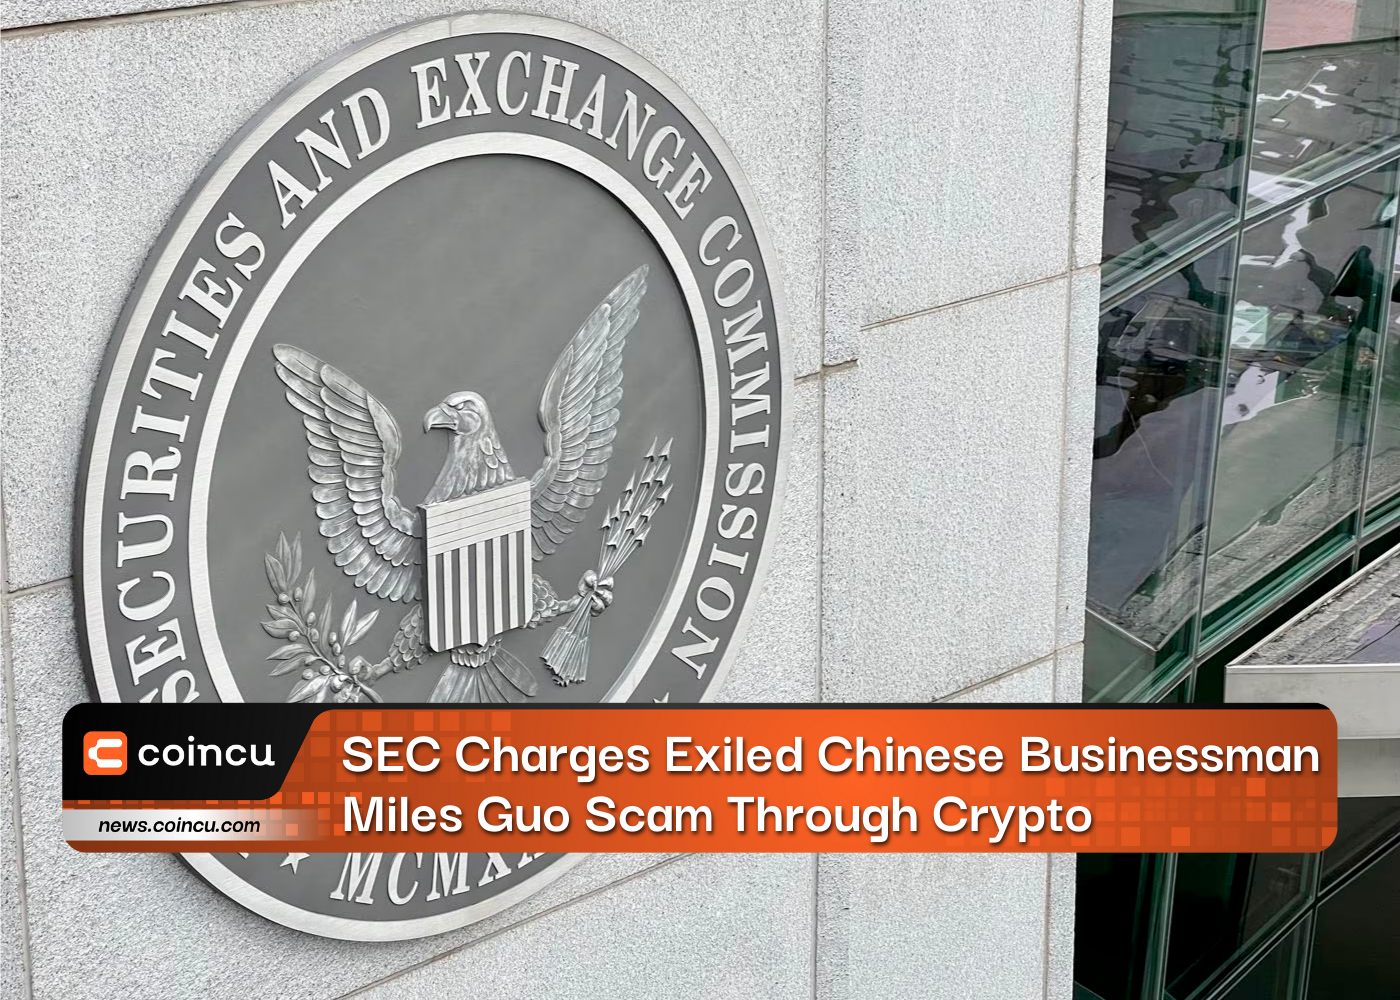 SEC Charges Exiled Chinese Businessman Miles Guo Scam Through Crypto